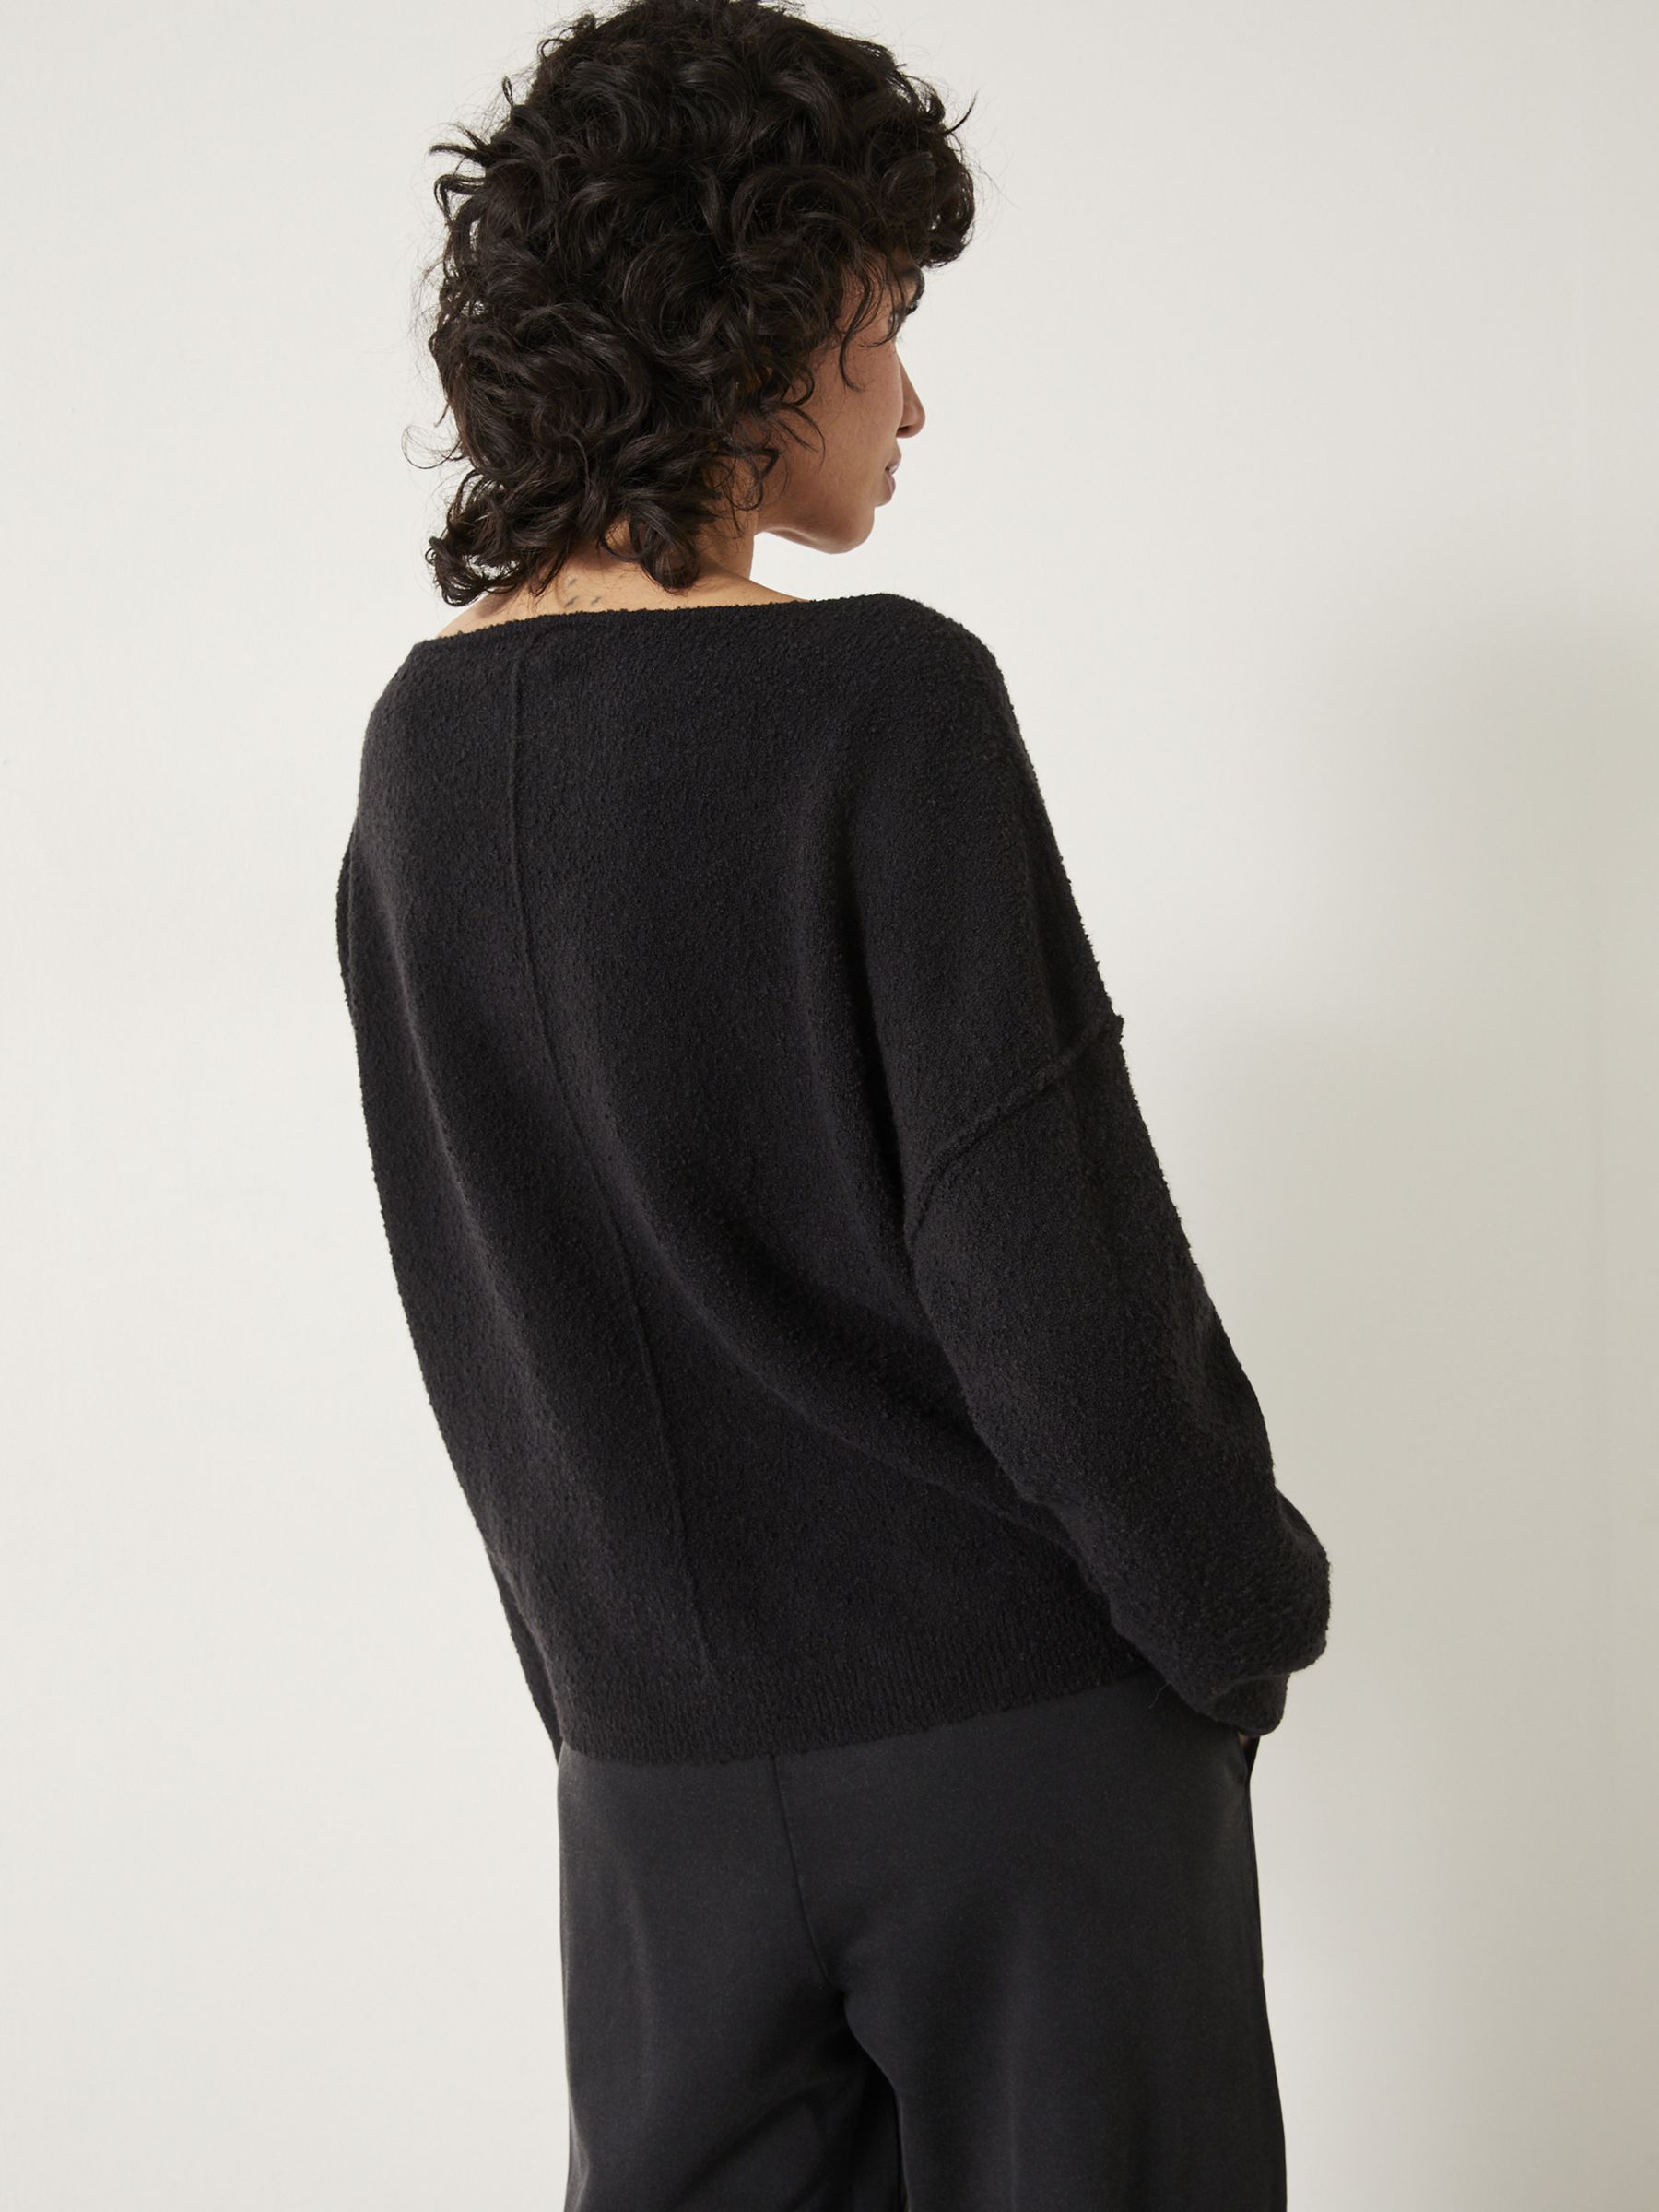 HUSH Lilly Slouchy Fit Wool Blend Jumper, Black at John Lewis & Partners